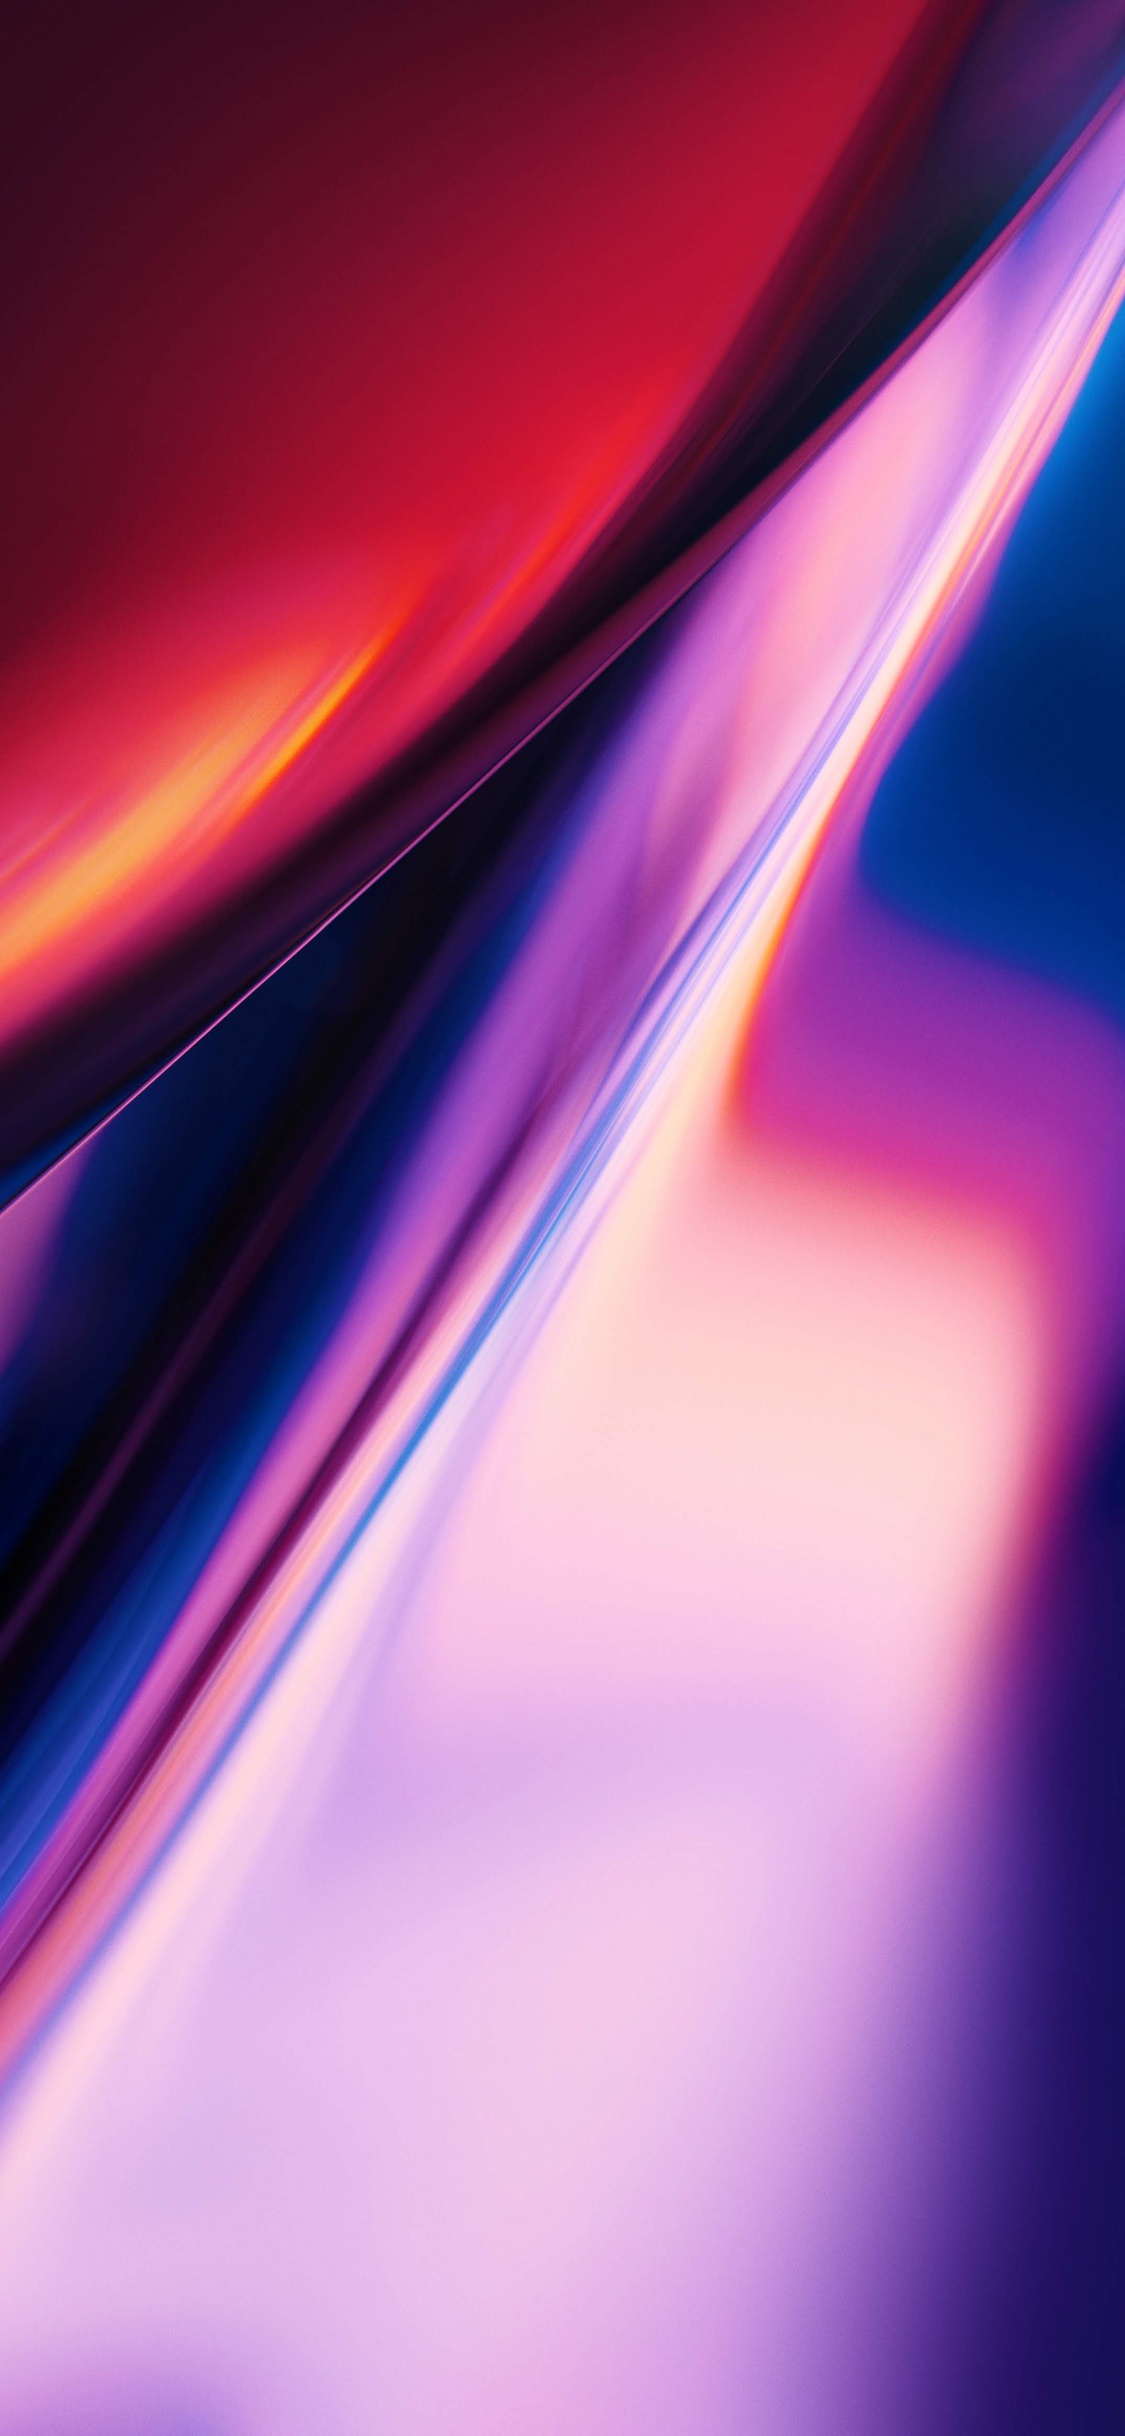 OnePlus 7 Pro, Oneplus 7t, Oneplus 8, Android, Azul. Wallpaper in 1125x2436 Resolution